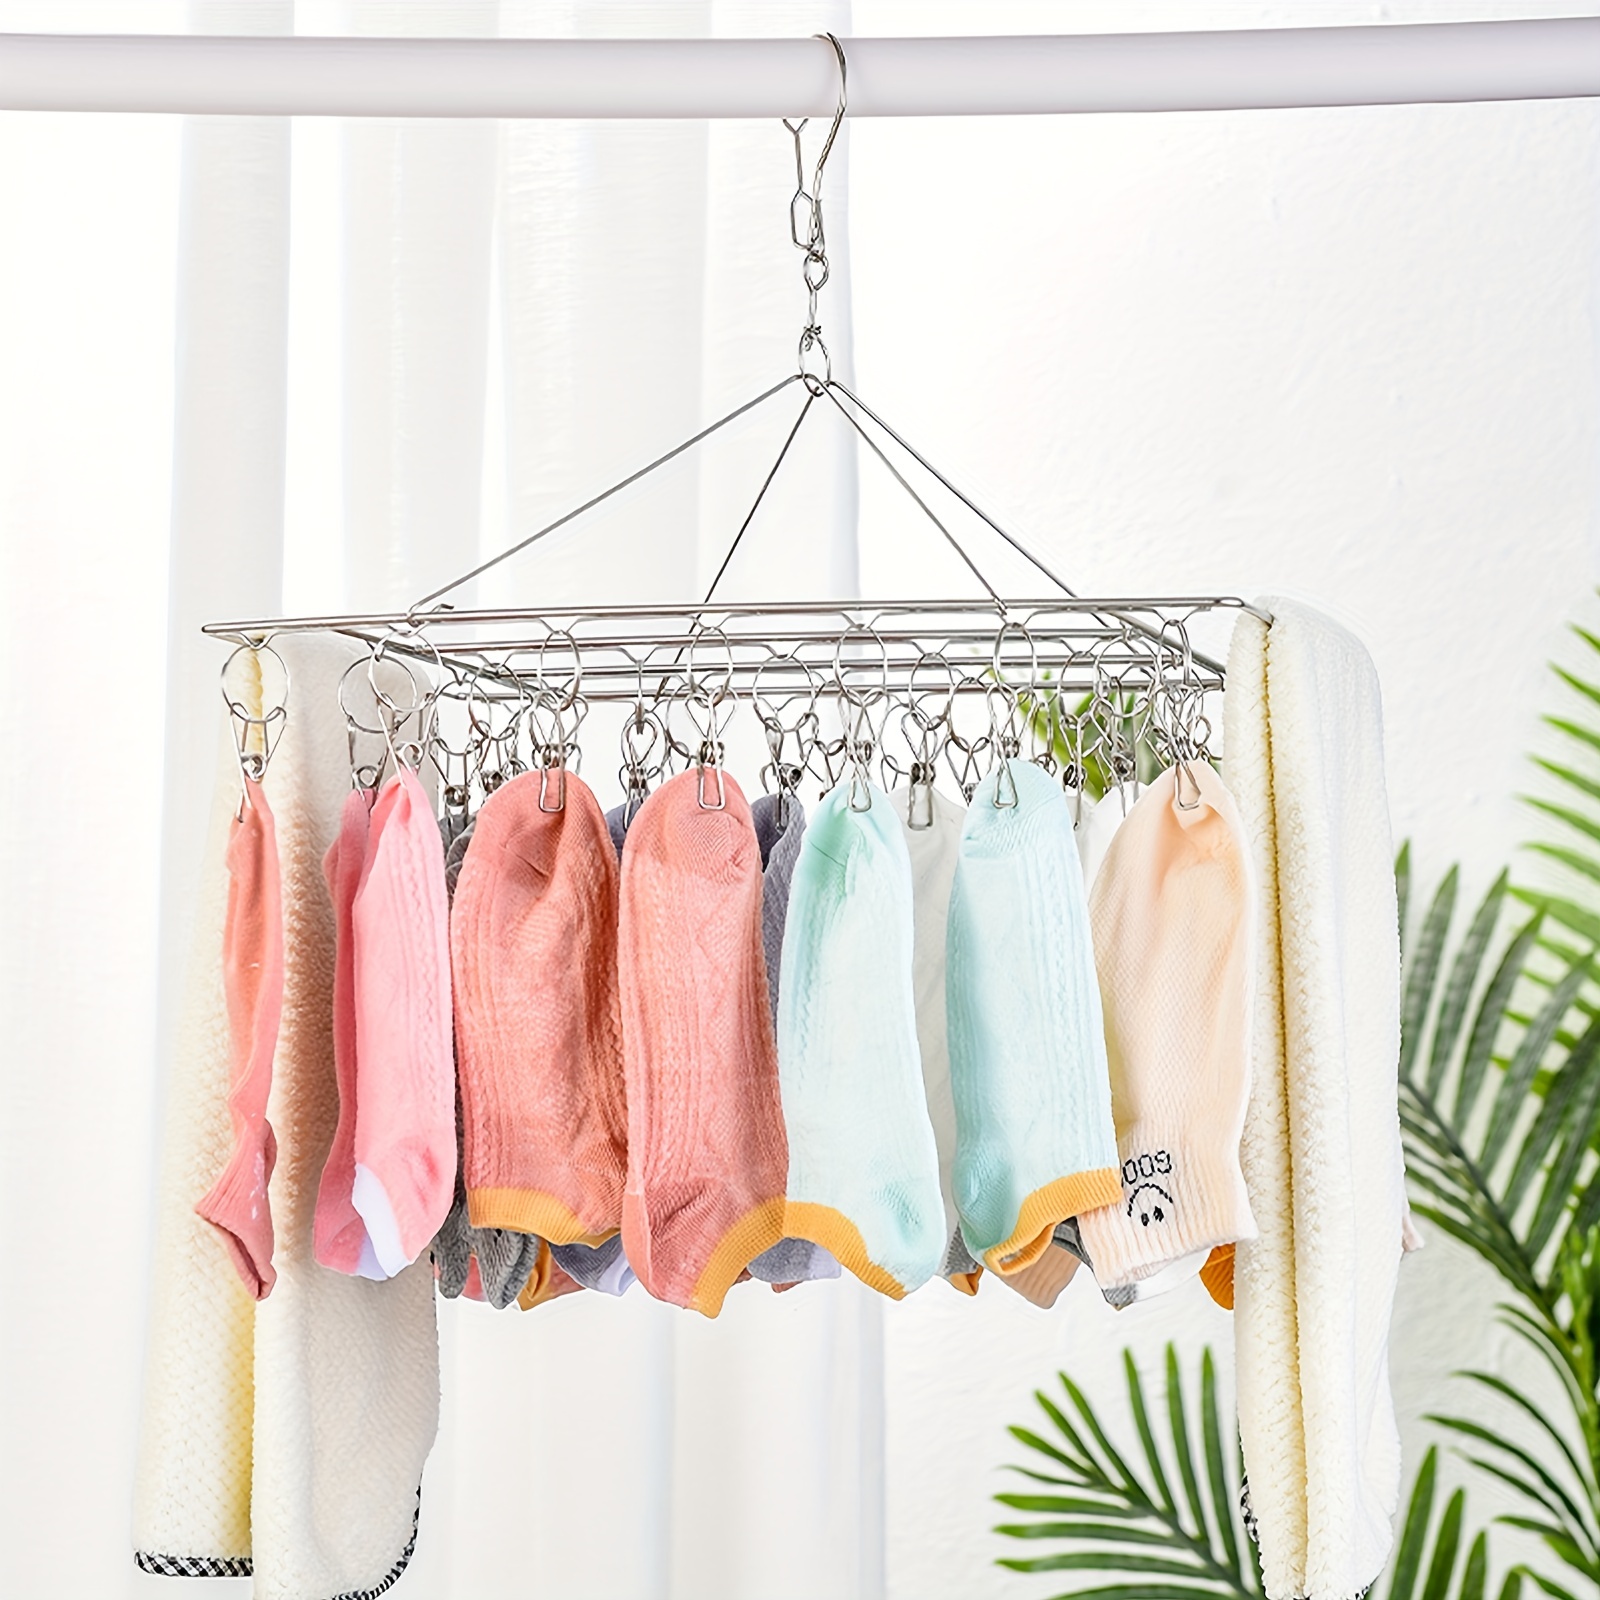 dedepeng Foldable Windproof Travel Clothes Hanger Underwear Socks Bra Drying  Rack Clip Bathroom Organiser Travel Hanger Clothes Pegs for Hanging Clothes  : : Home & Kitchen